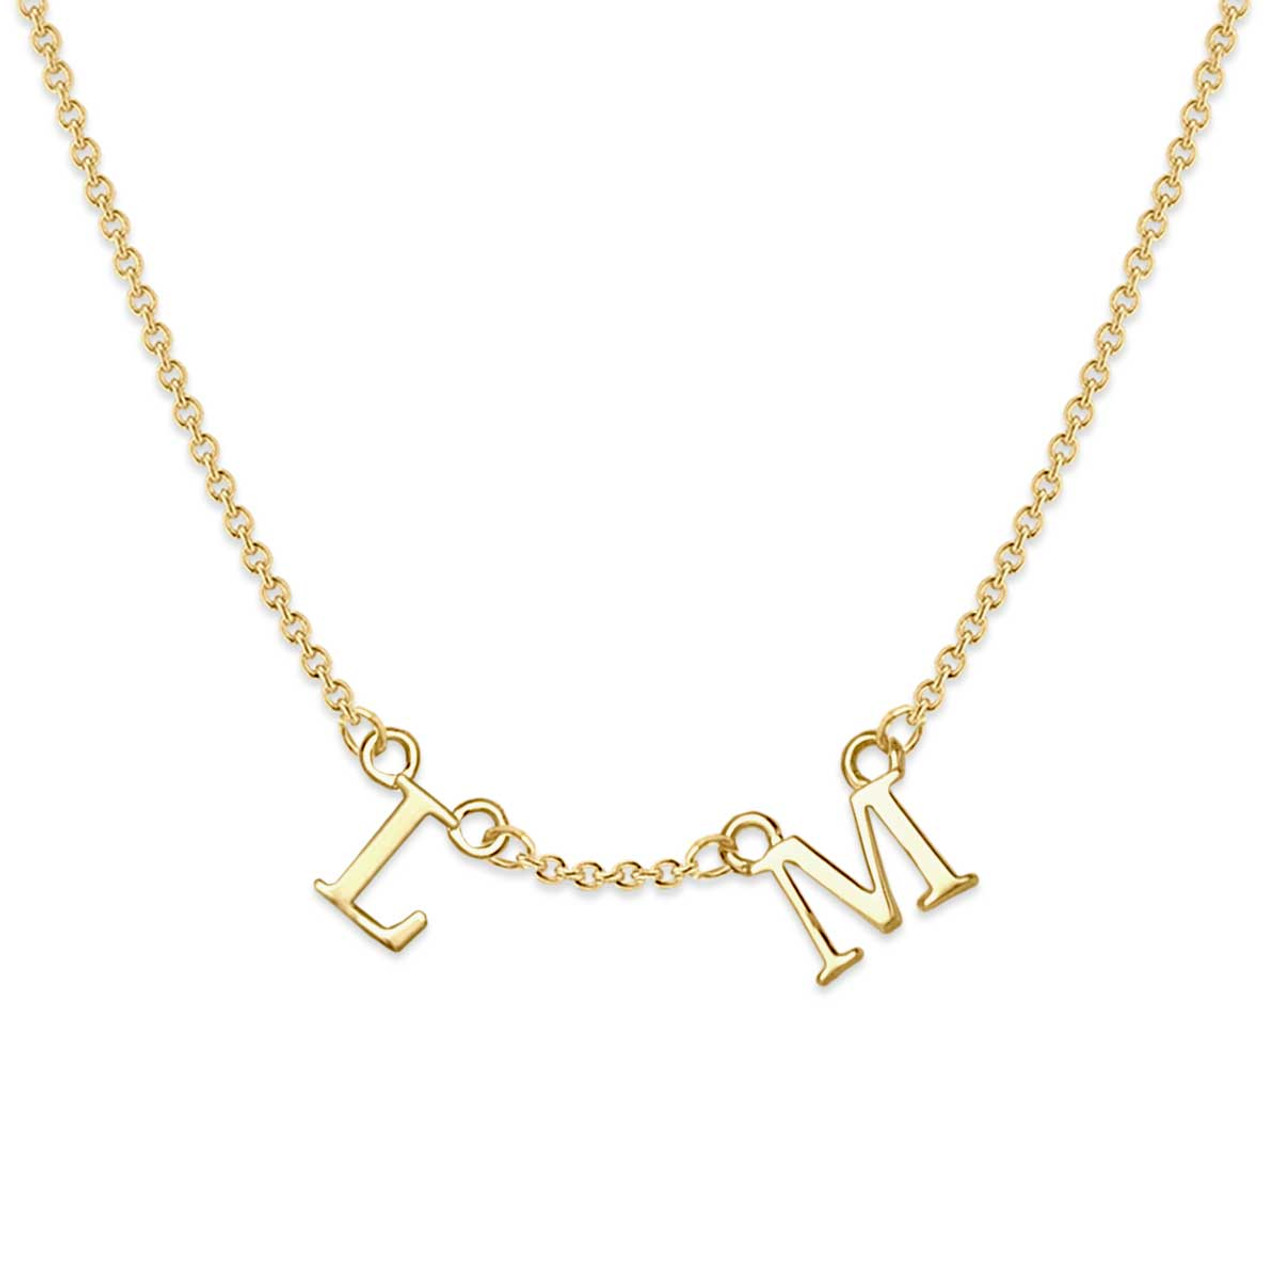 14k Gold Mia Letter Necklace - 2 Letters - J.H. Breakell and Co.